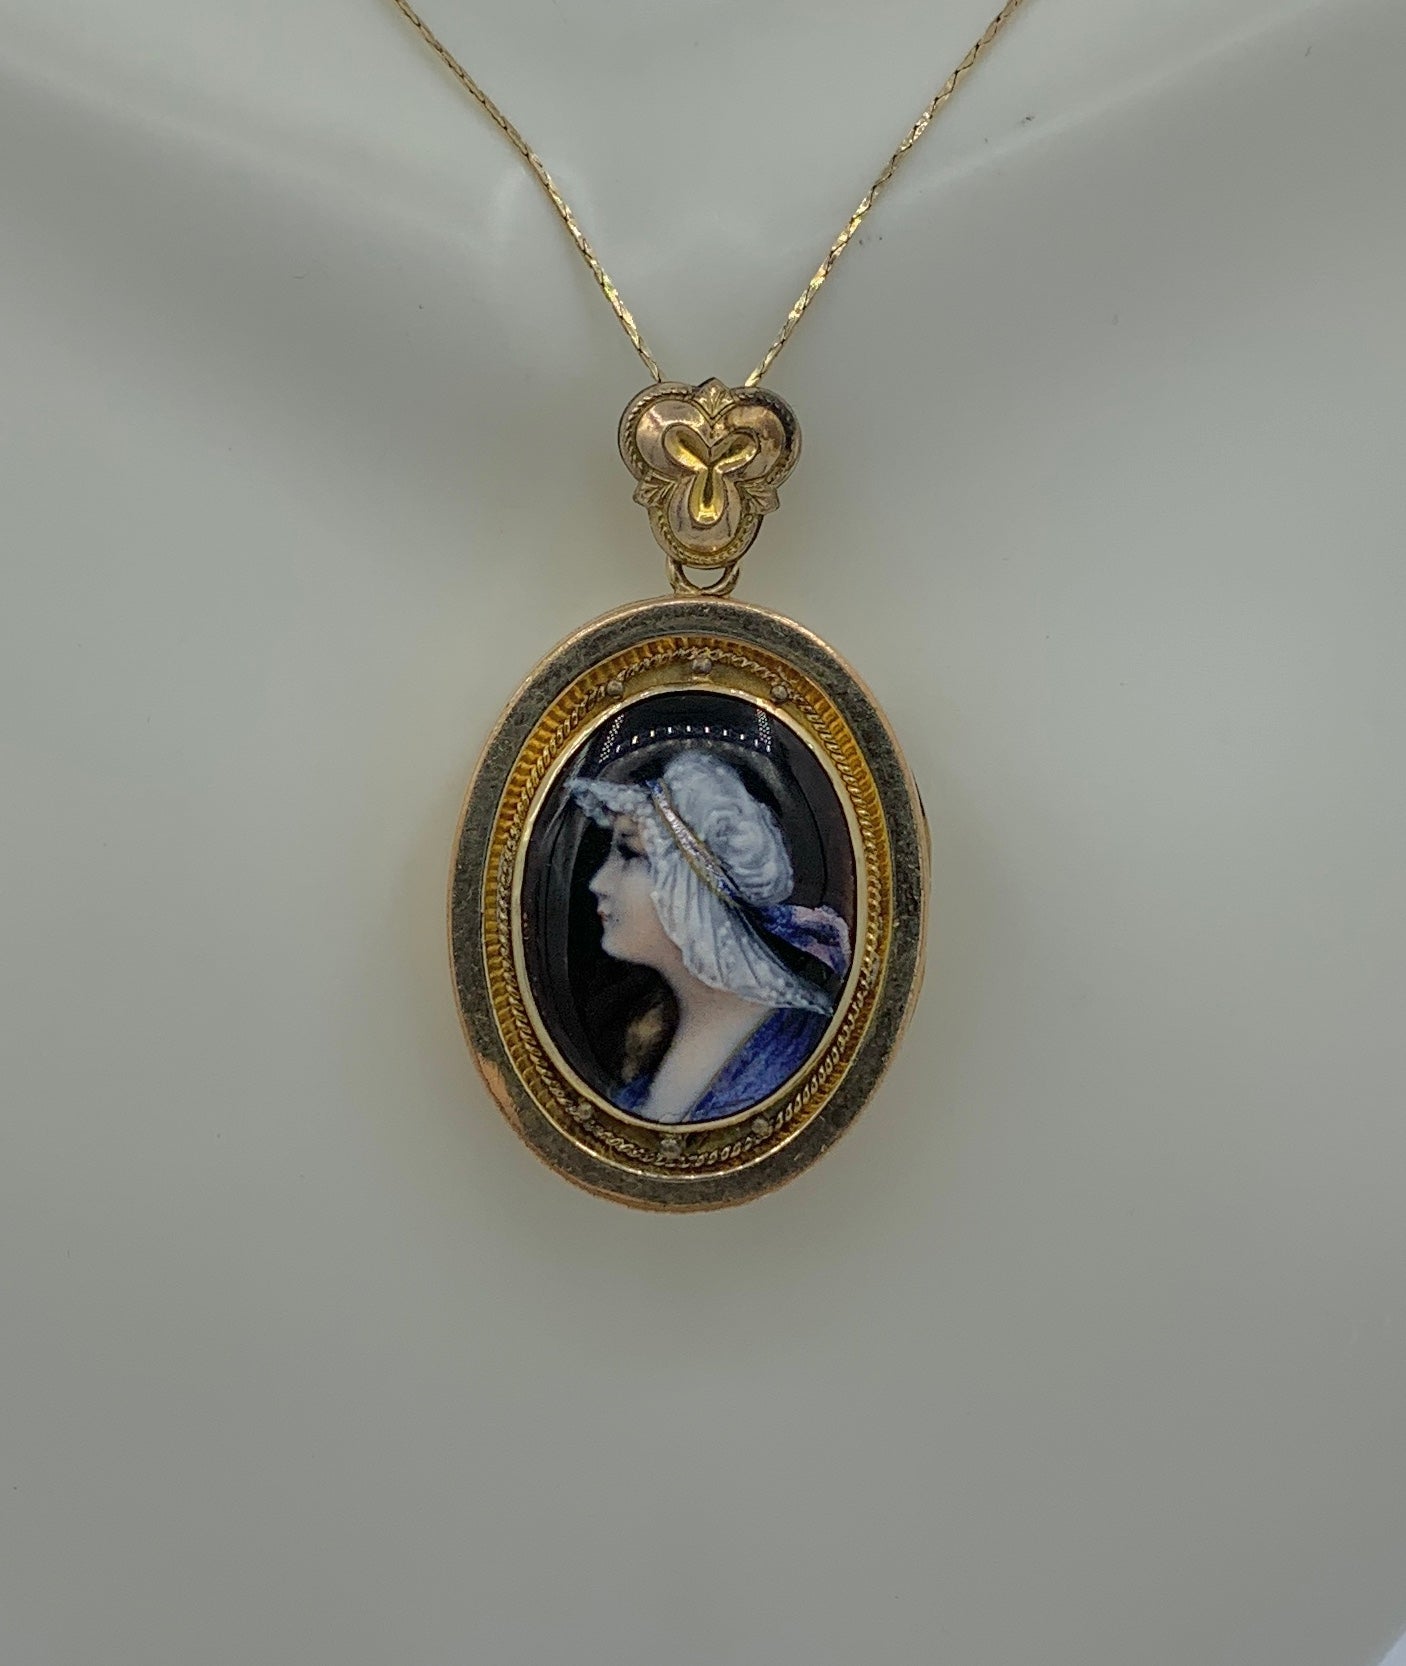 This is a rare Art Deco - Art Nouveau Limoges Enamel Locket Pendant.  The magnificent portrait of a woman is hand painted with vivid iridescent colors.   This portrait of a woman has a gorgeous serene face with a beatific expression.  Her headdress